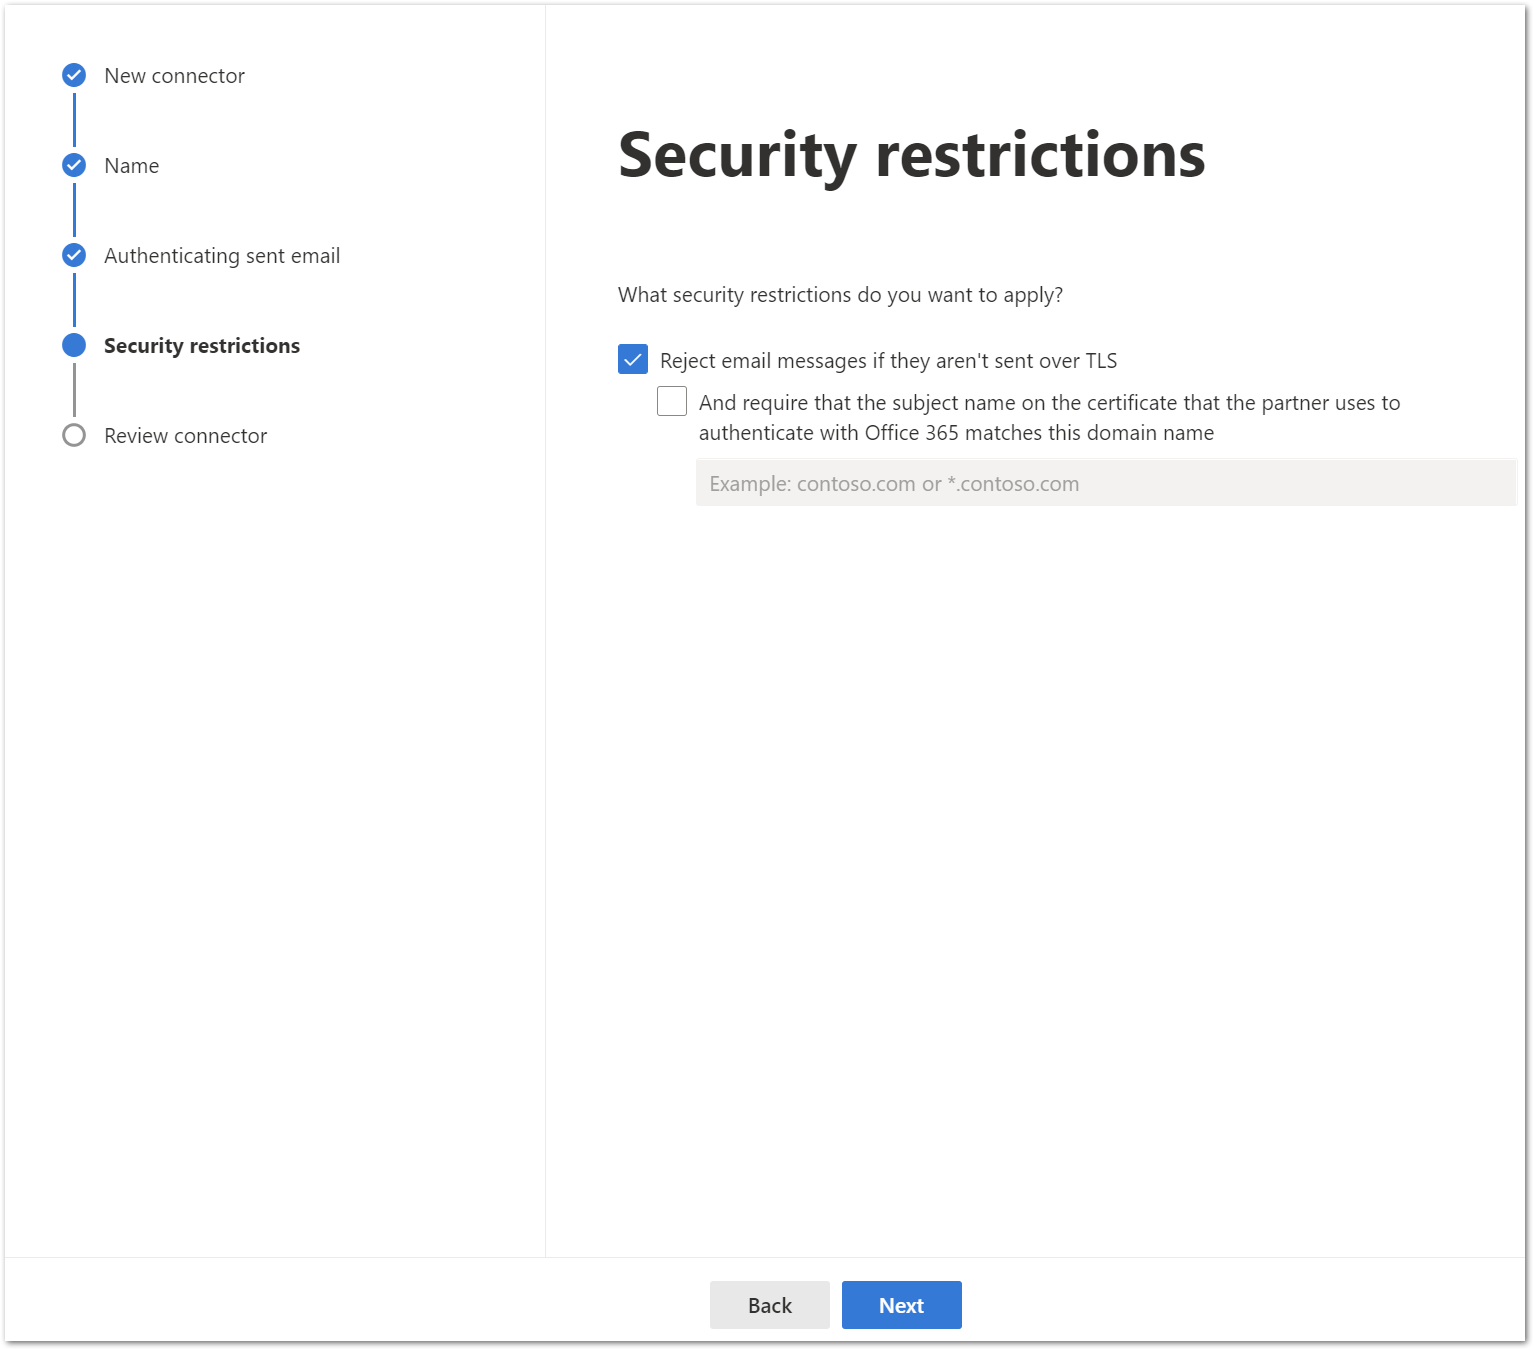 Create_a_Connector_in_Microsoft_365_-_Security_Restrictions.png